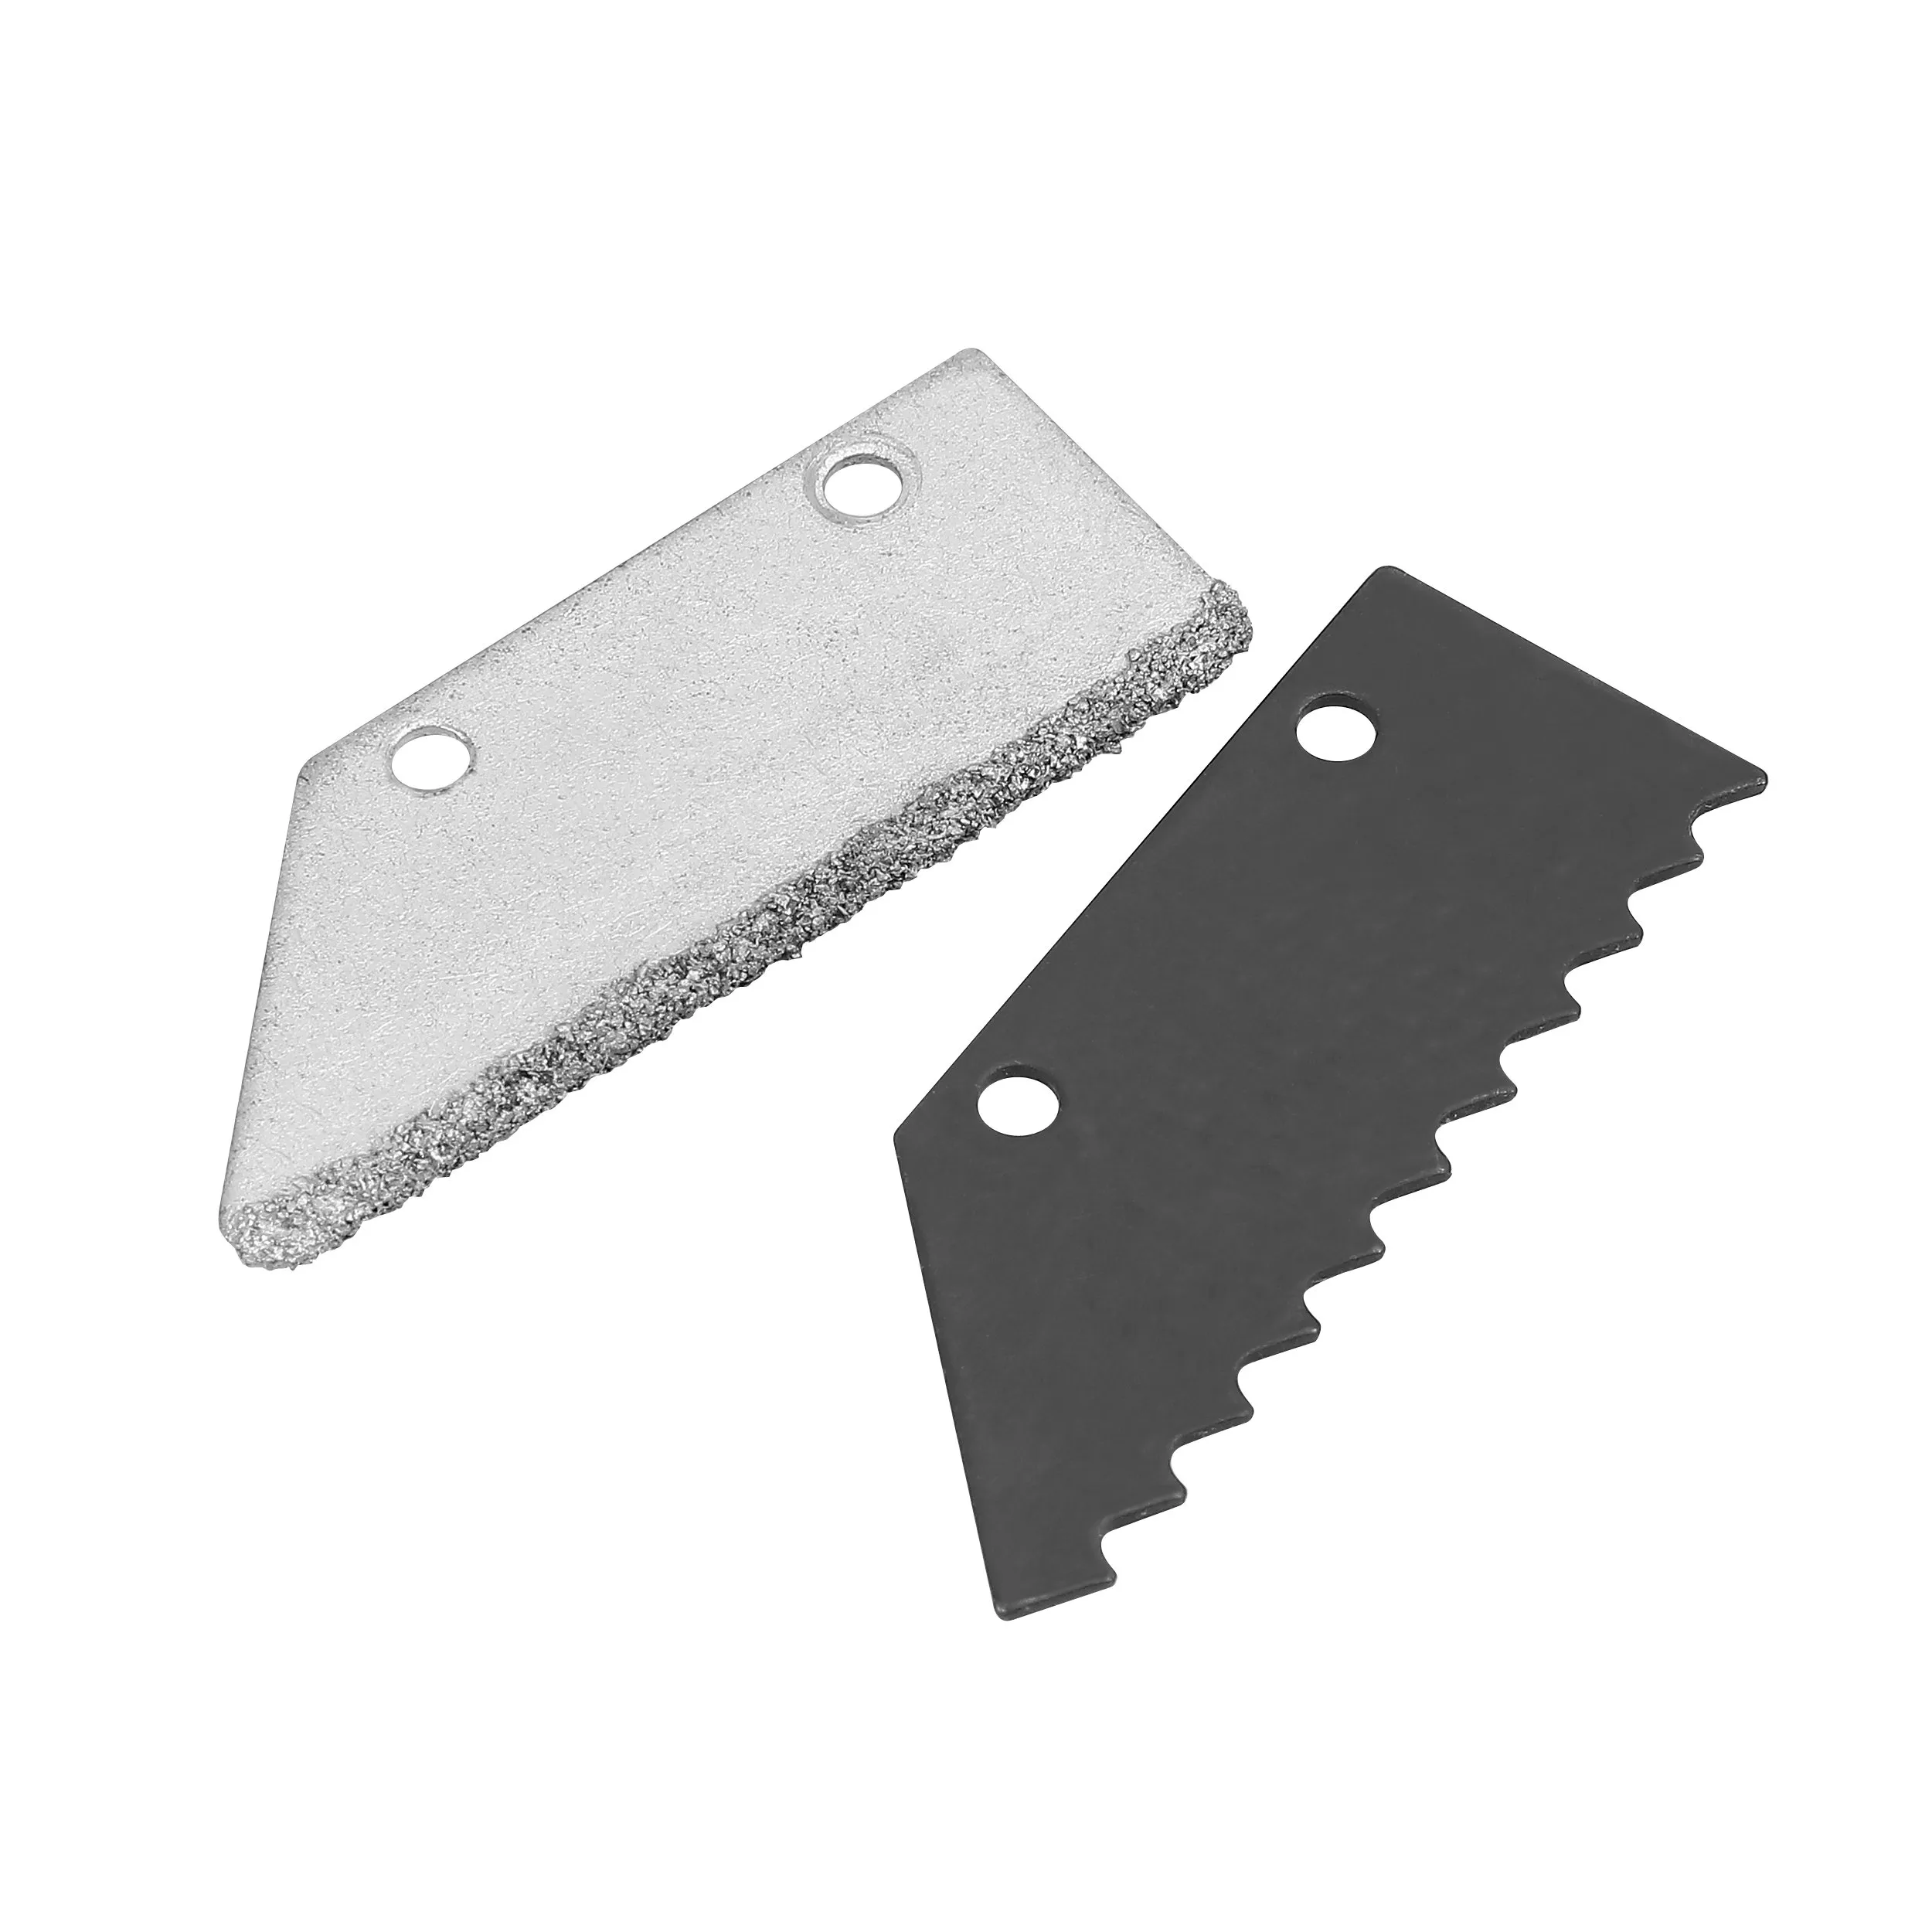 Grout Saw